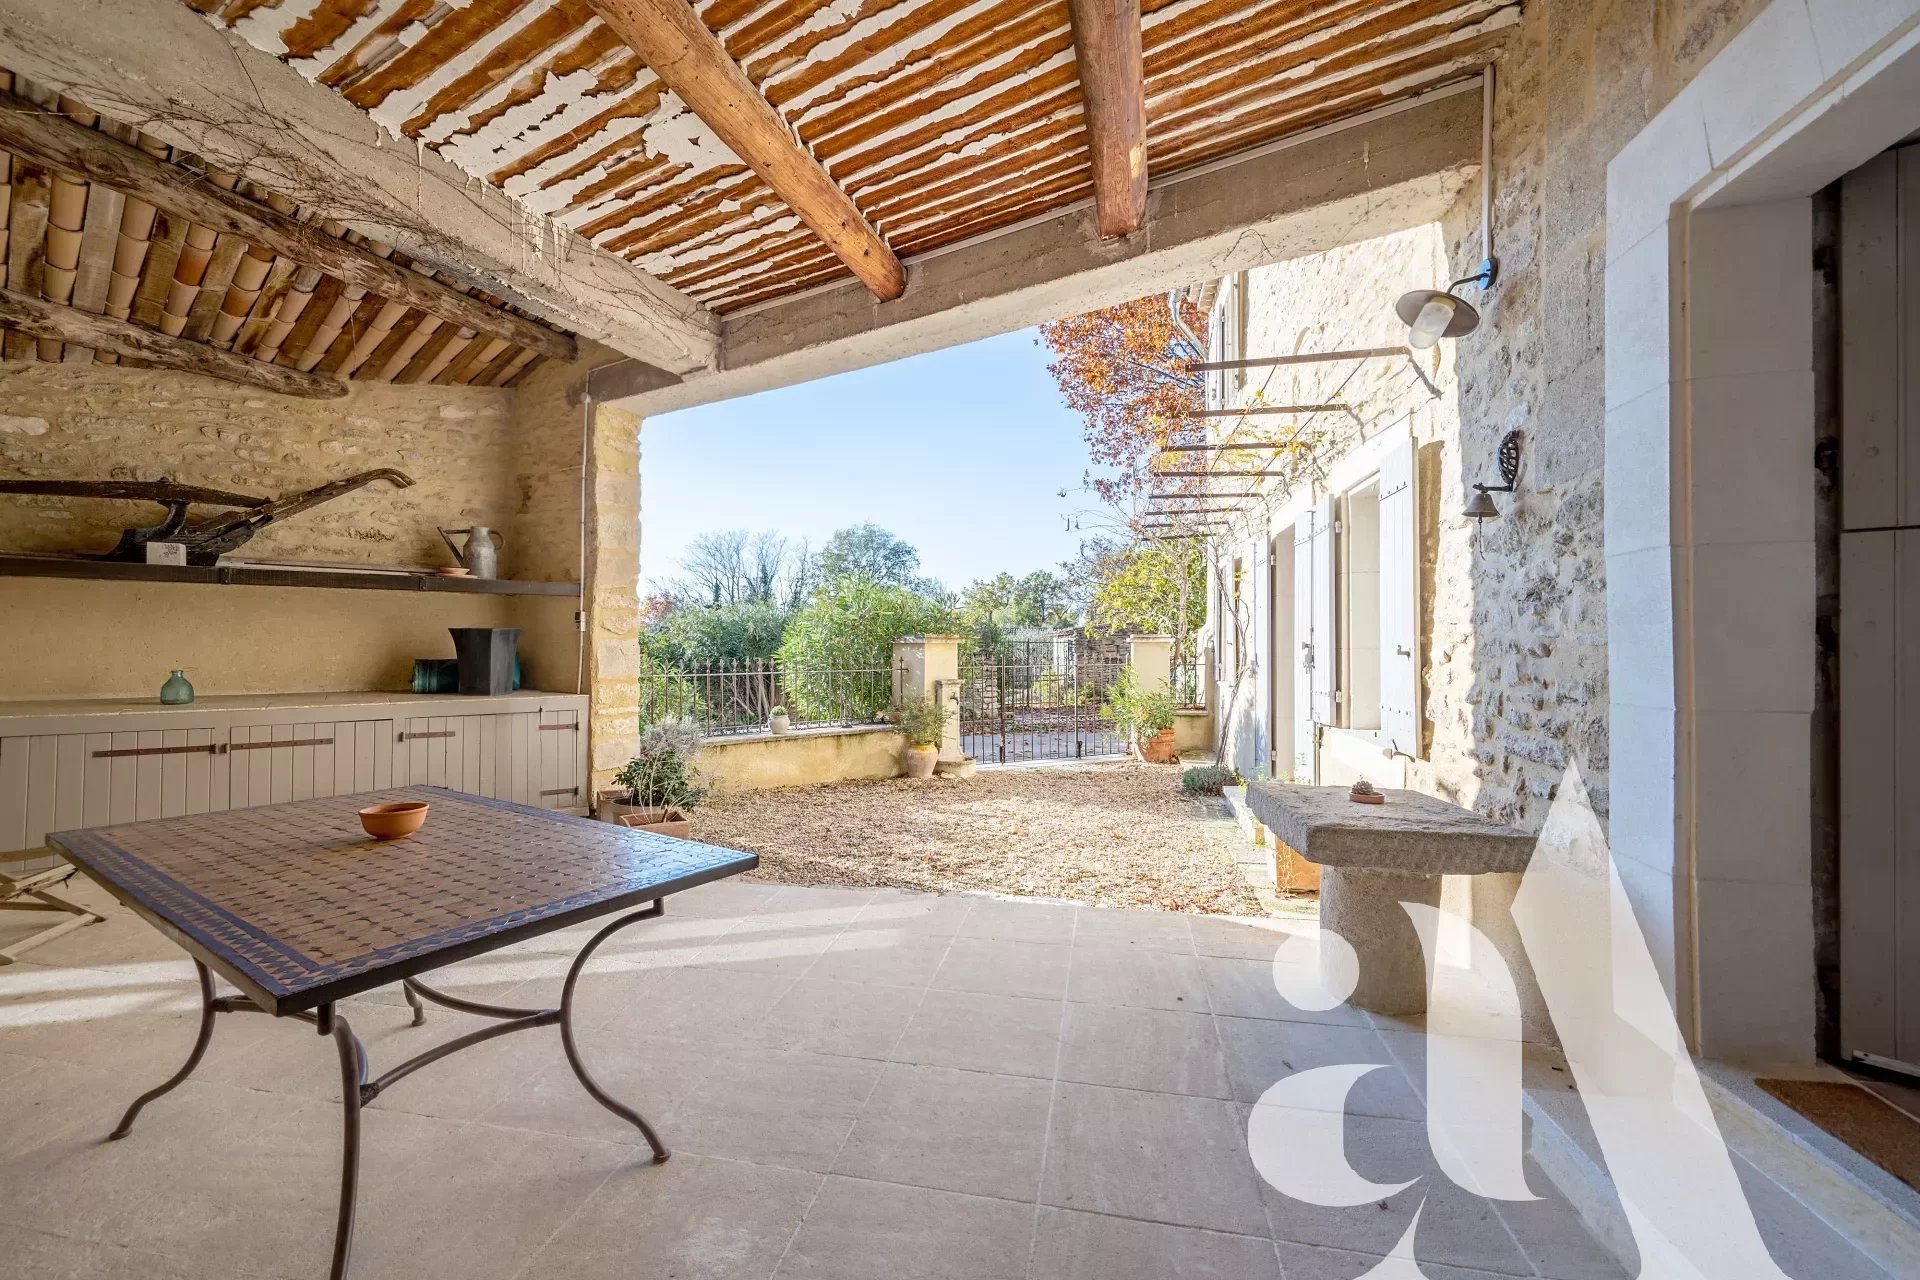 FOR SALE IN GORDES STONE HOUSE